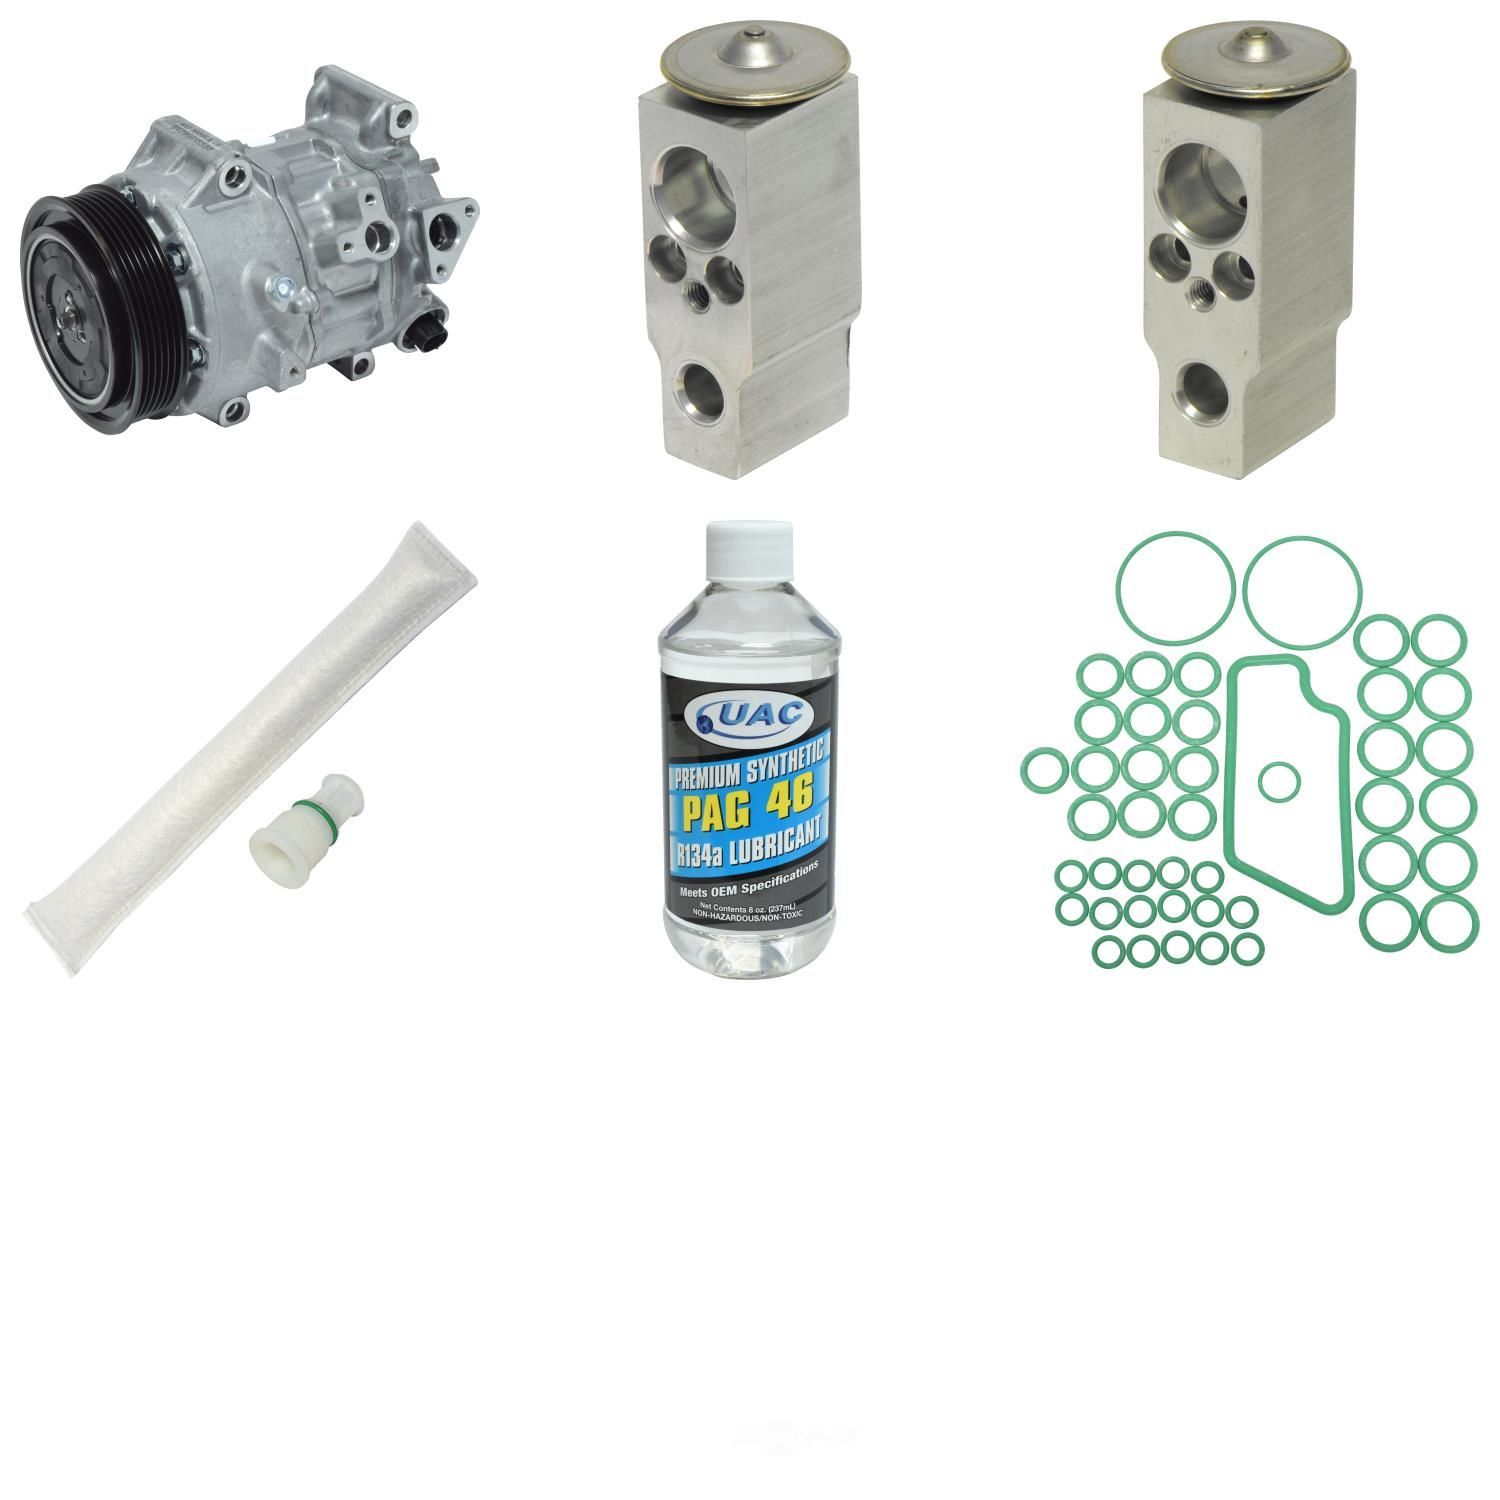 UNIVERSAL AIR CONDITIONER, INC. - Compressor Replacement Kit - UAC KT 5558